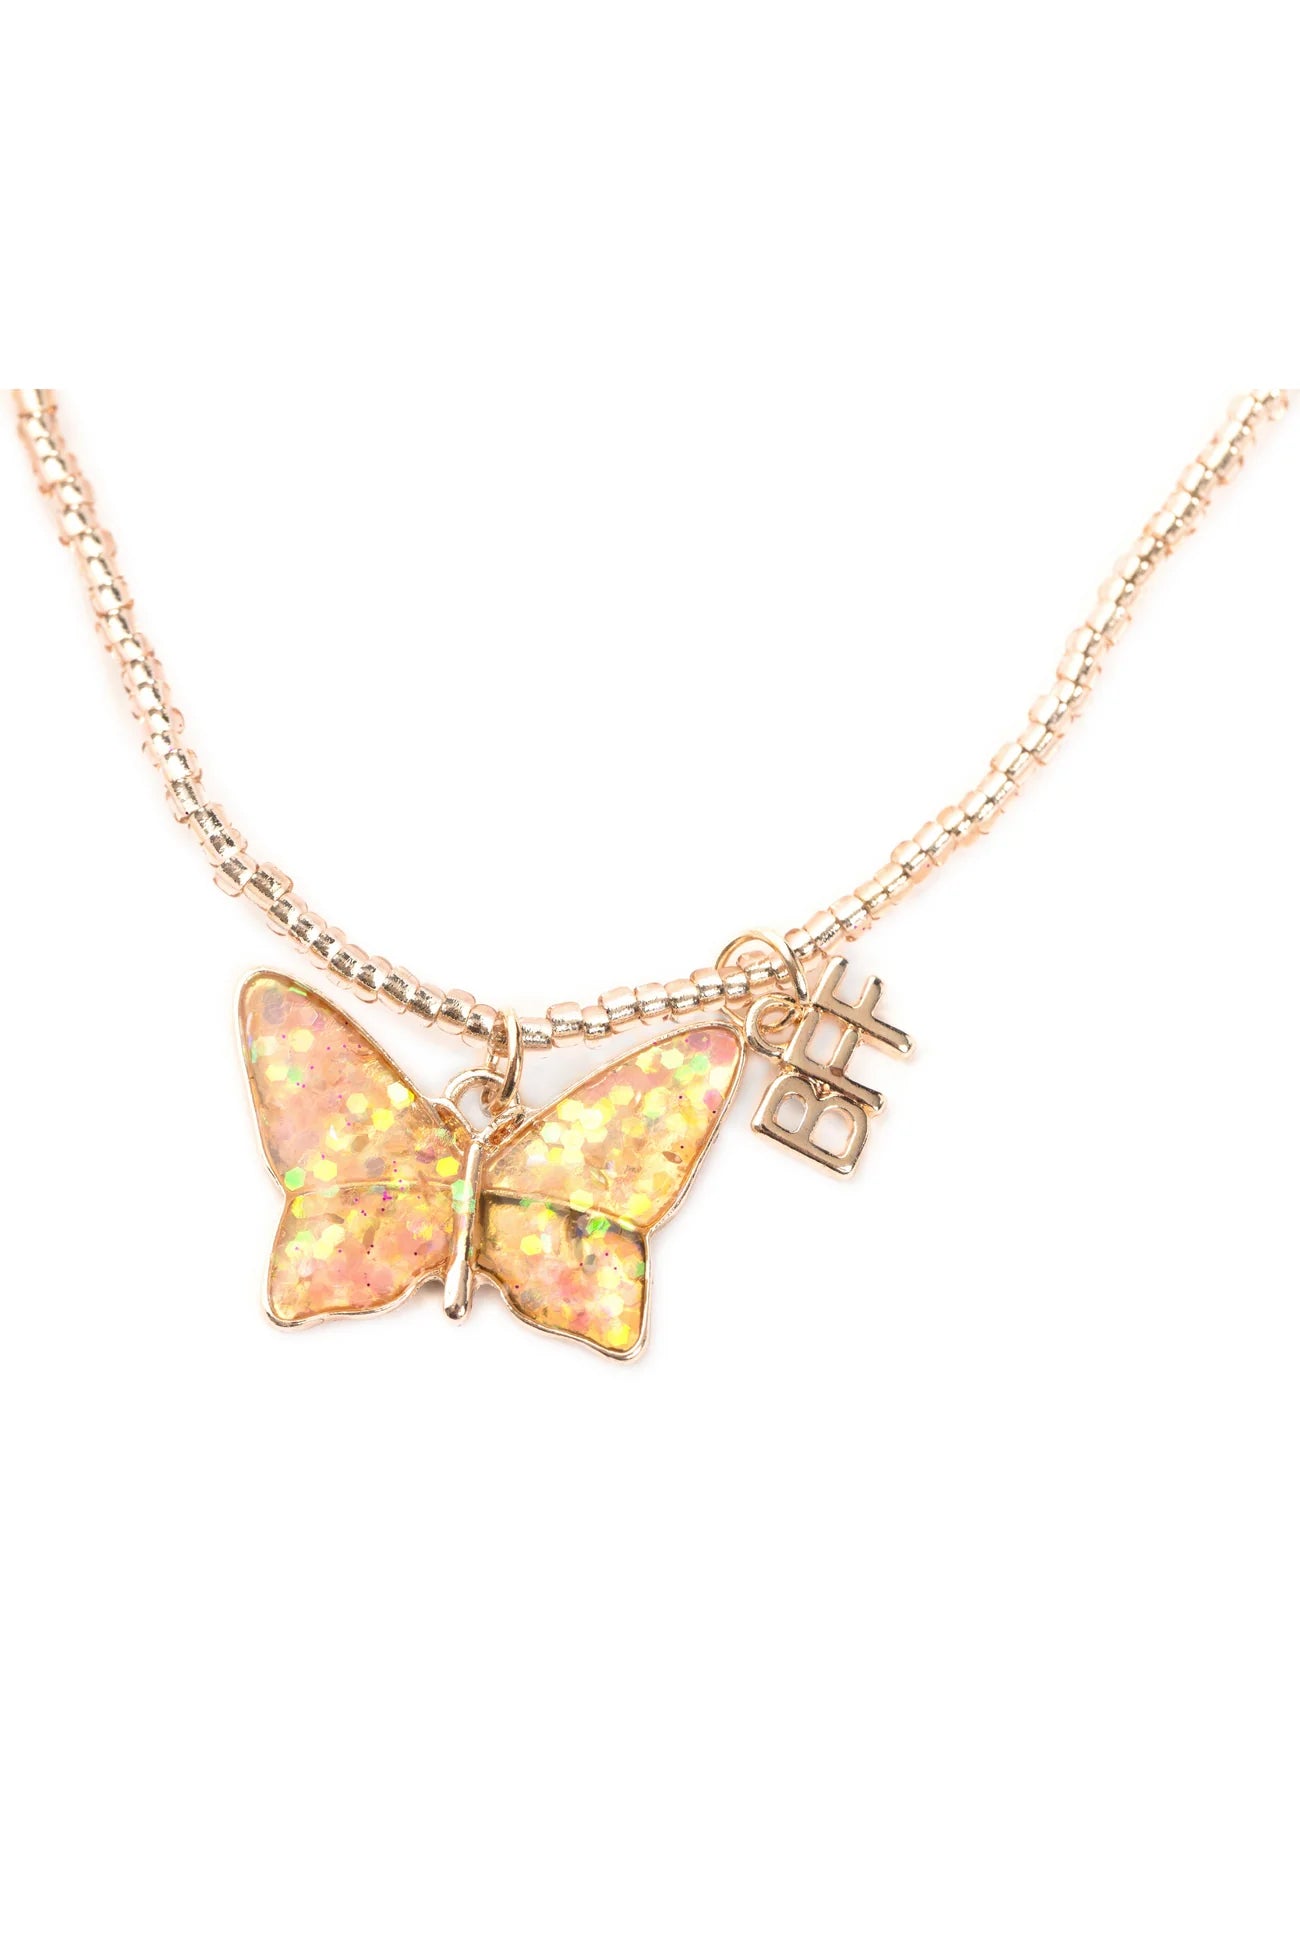 BFF BUTTERFLY SHARE + TEAR NECKLACES